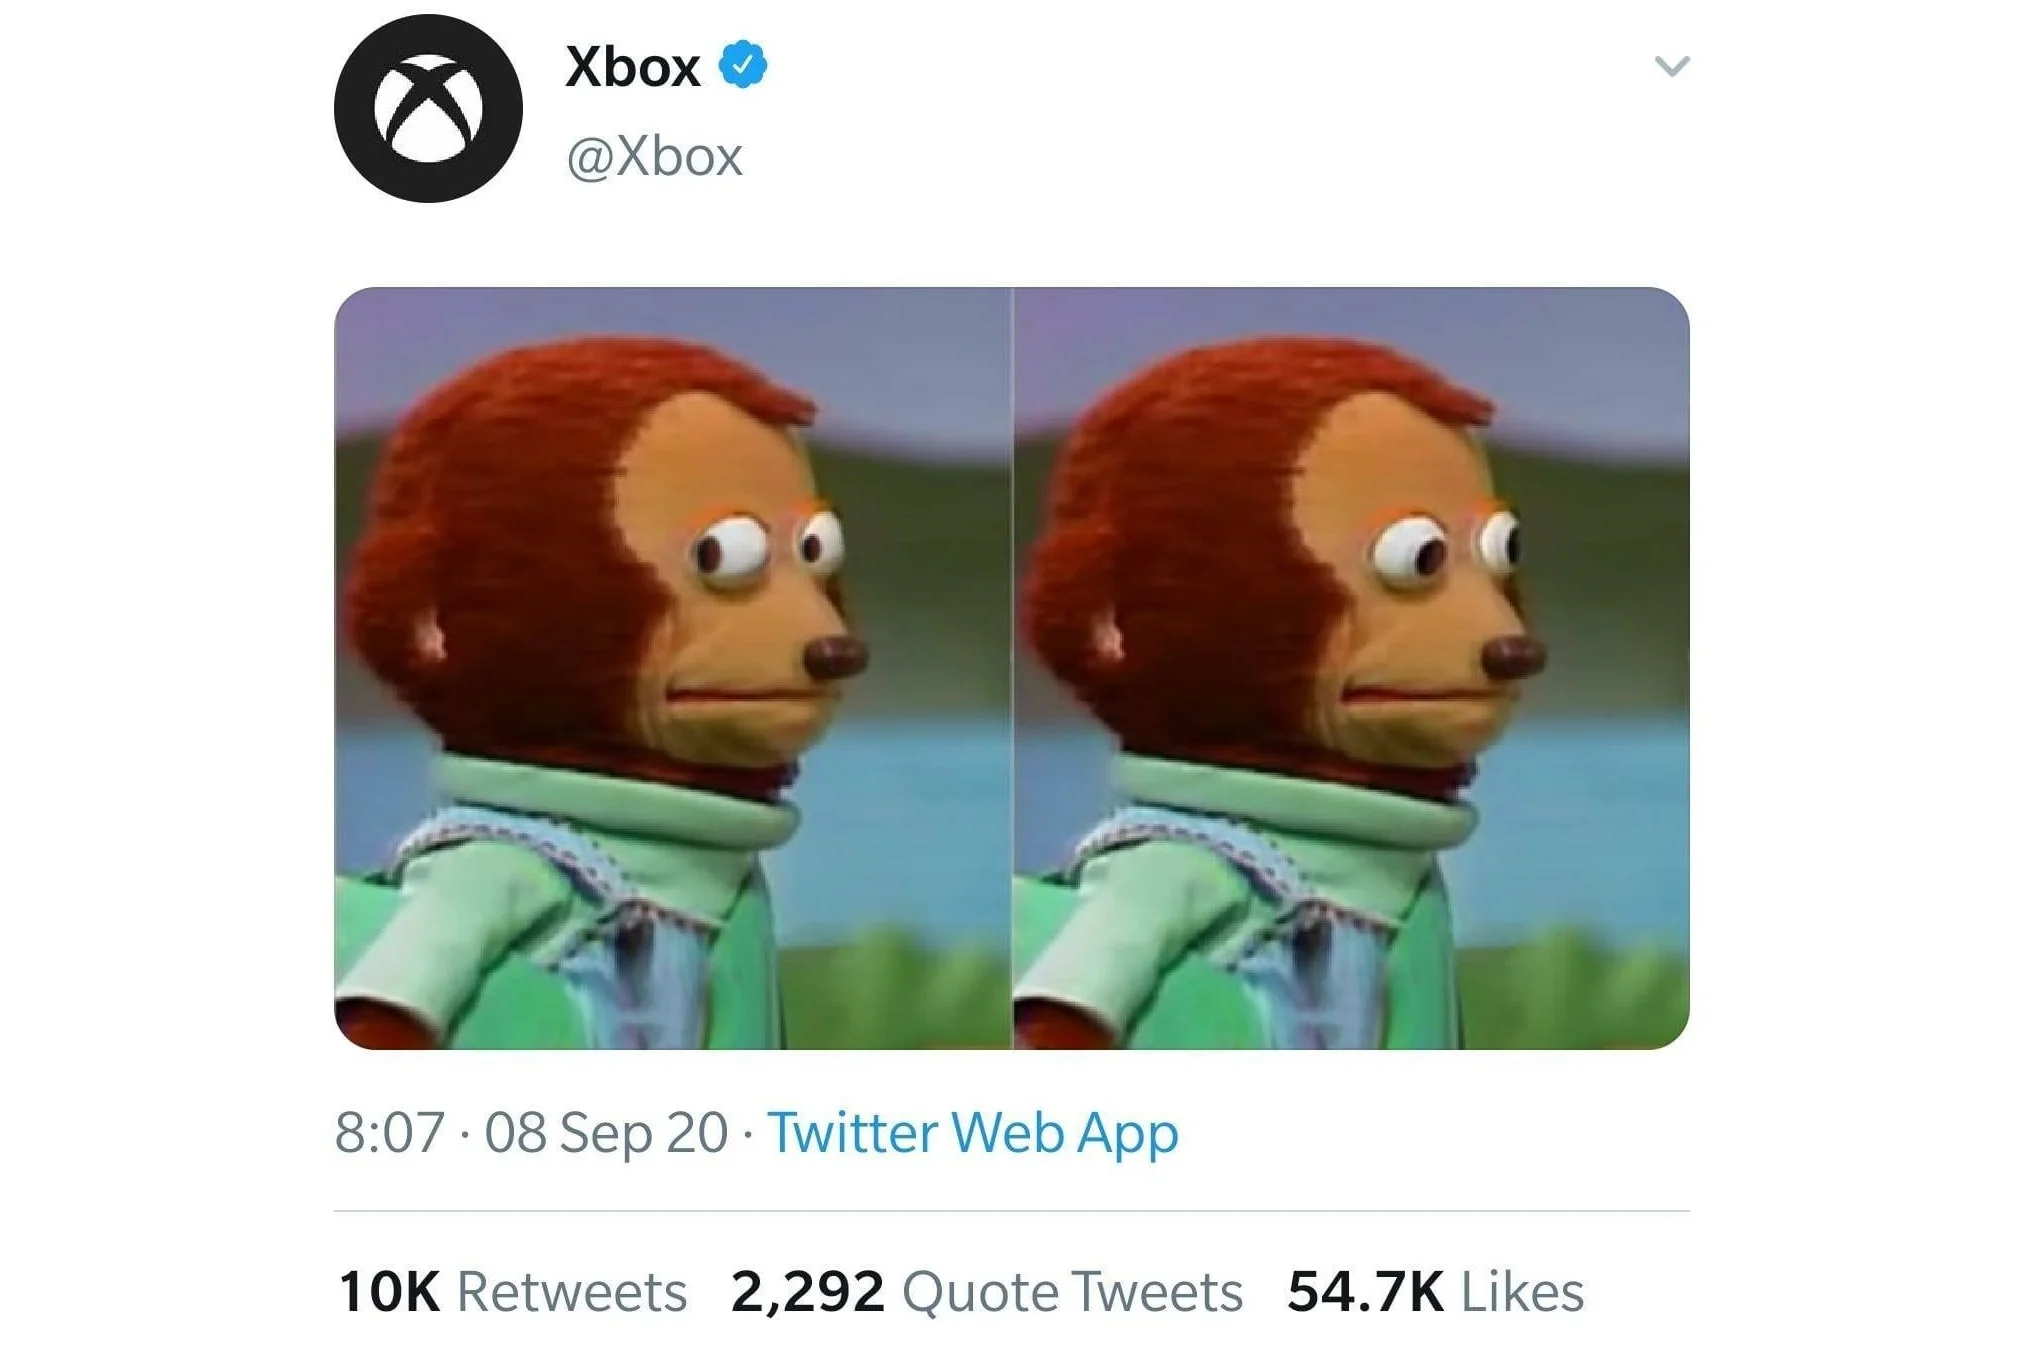 Official Reply from Xbox on Twitter